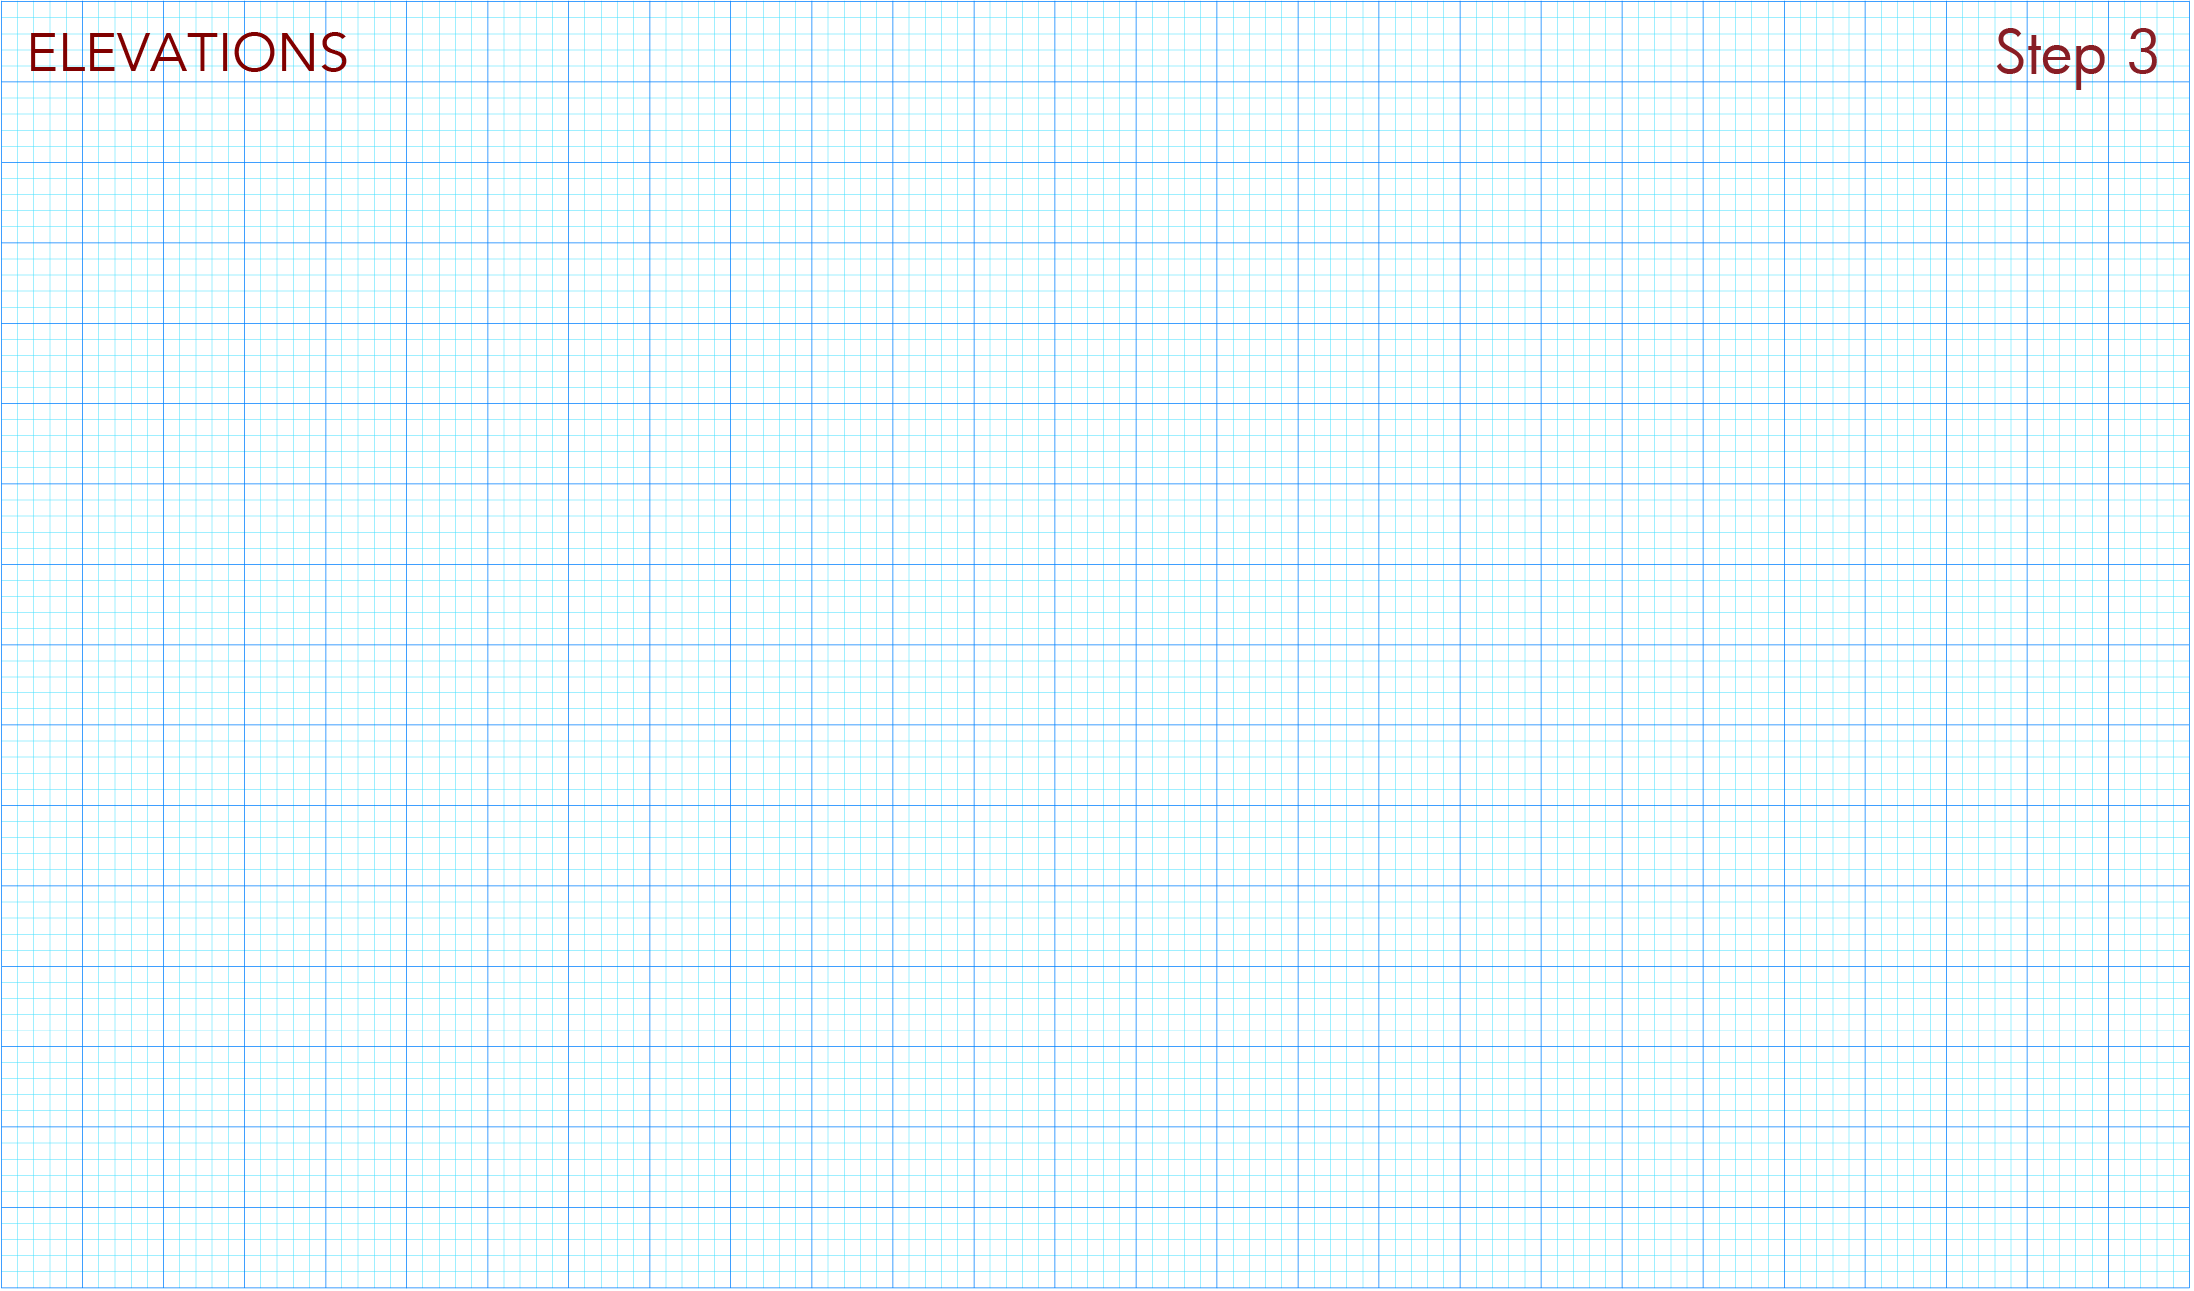 Download and print elevation graph paper